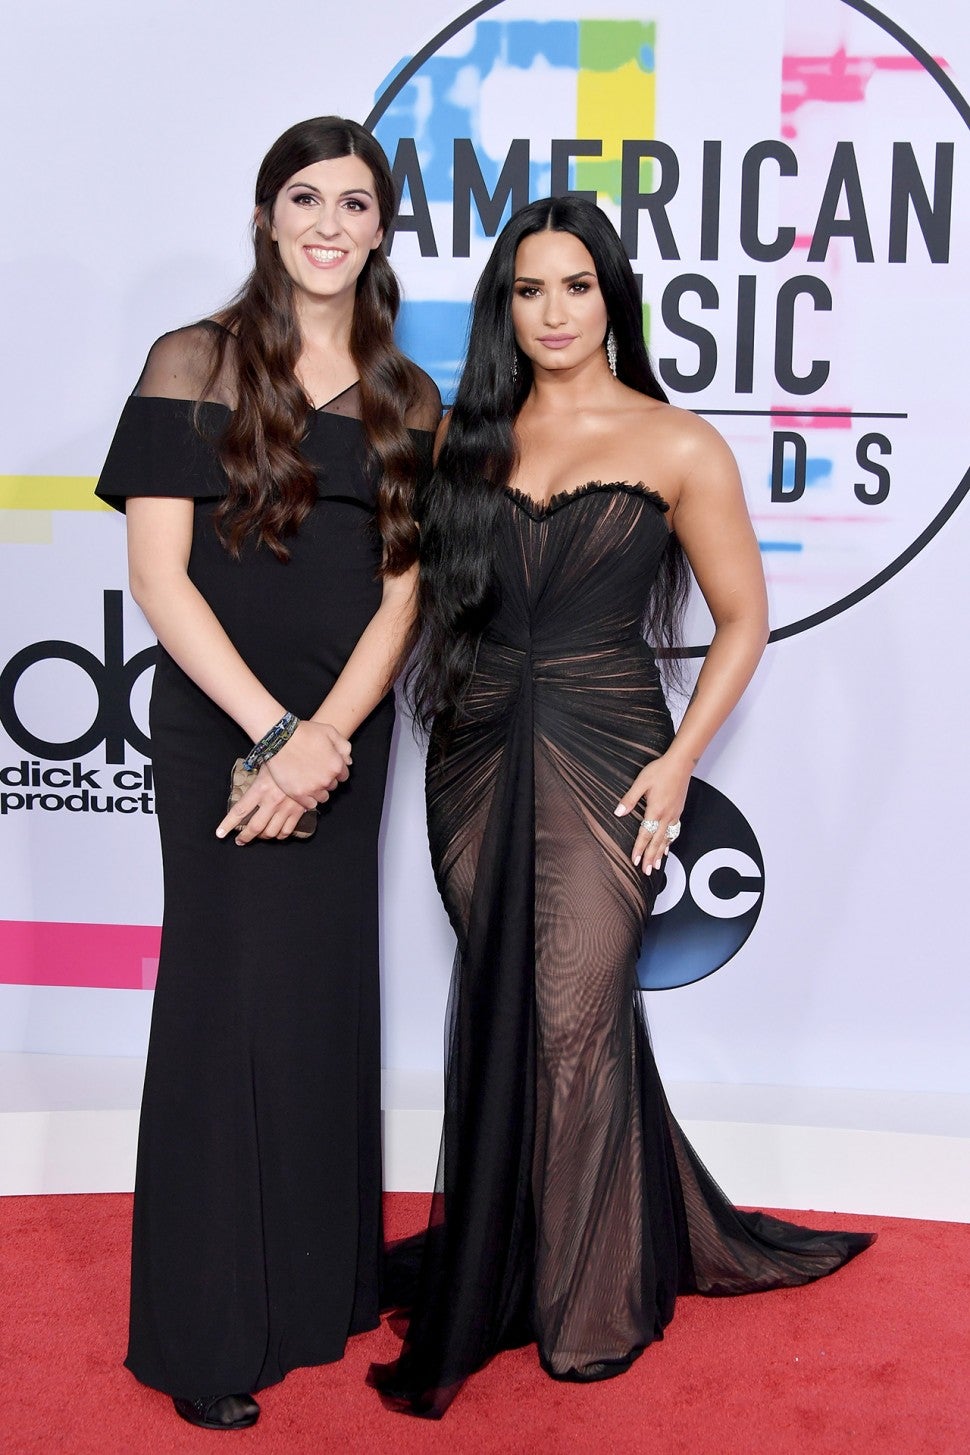 Demi Lovato and Danica Roem at AMAs